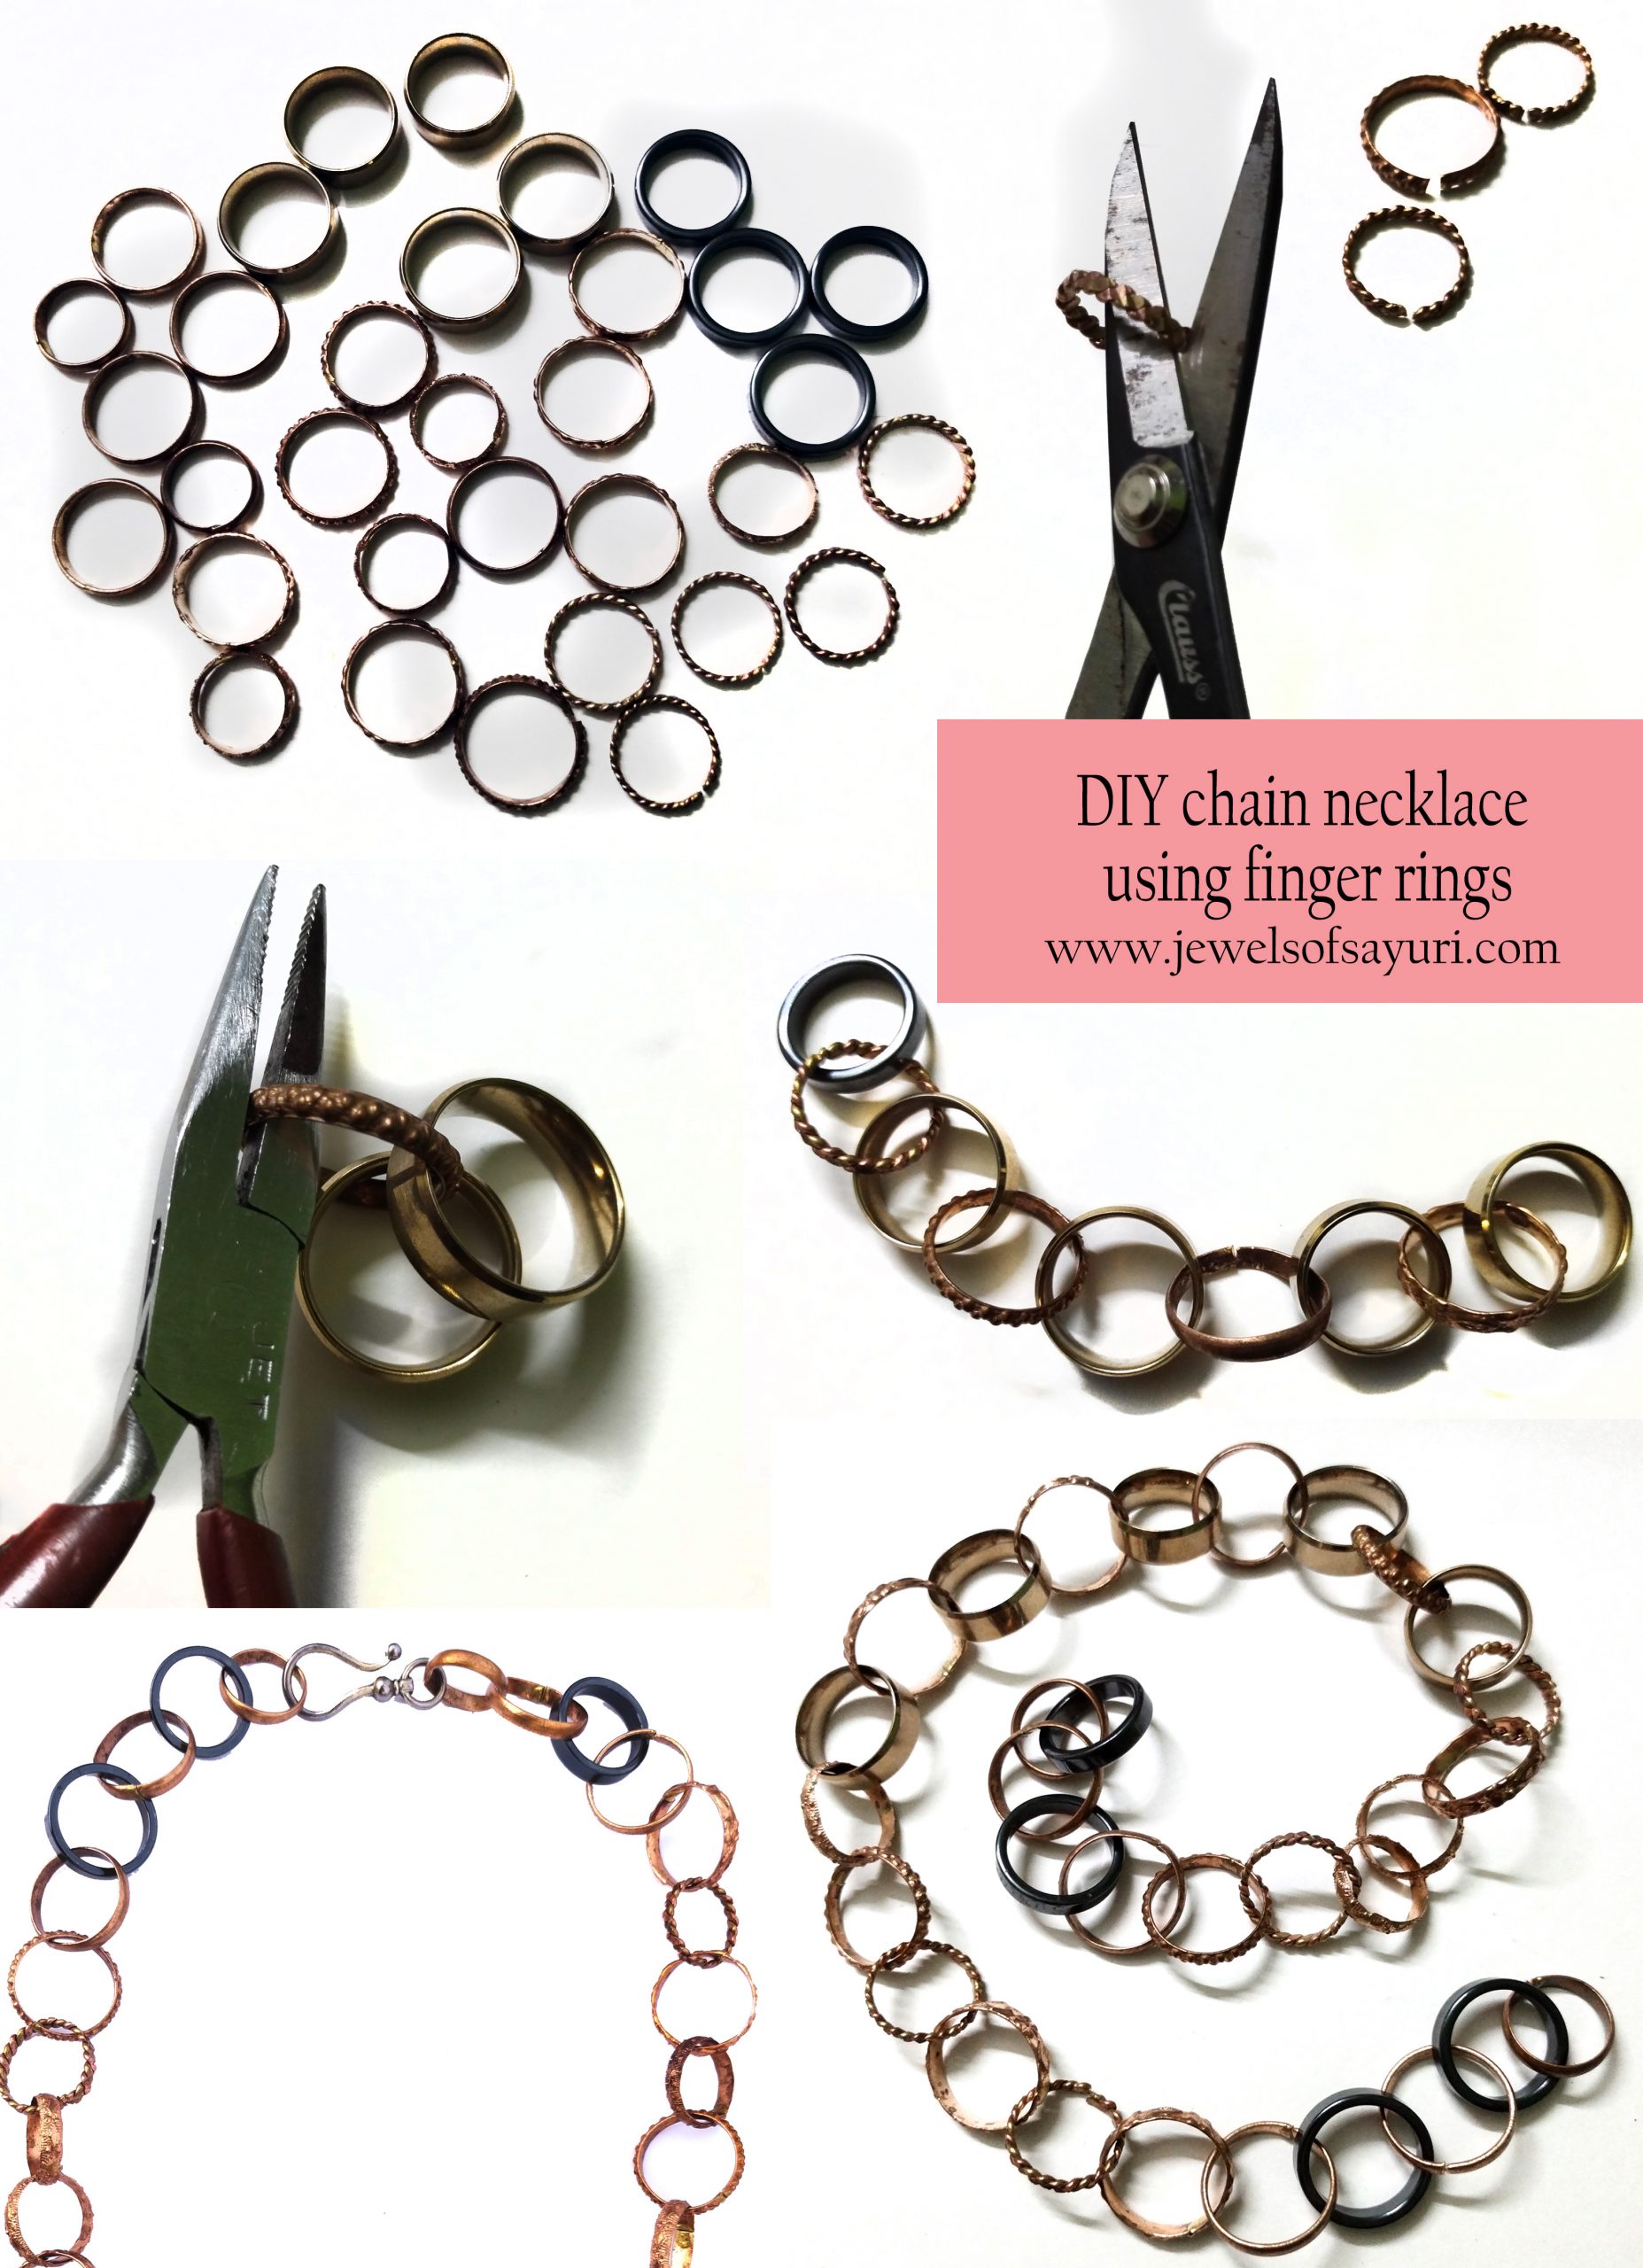 DIY chain necklace using finger rings